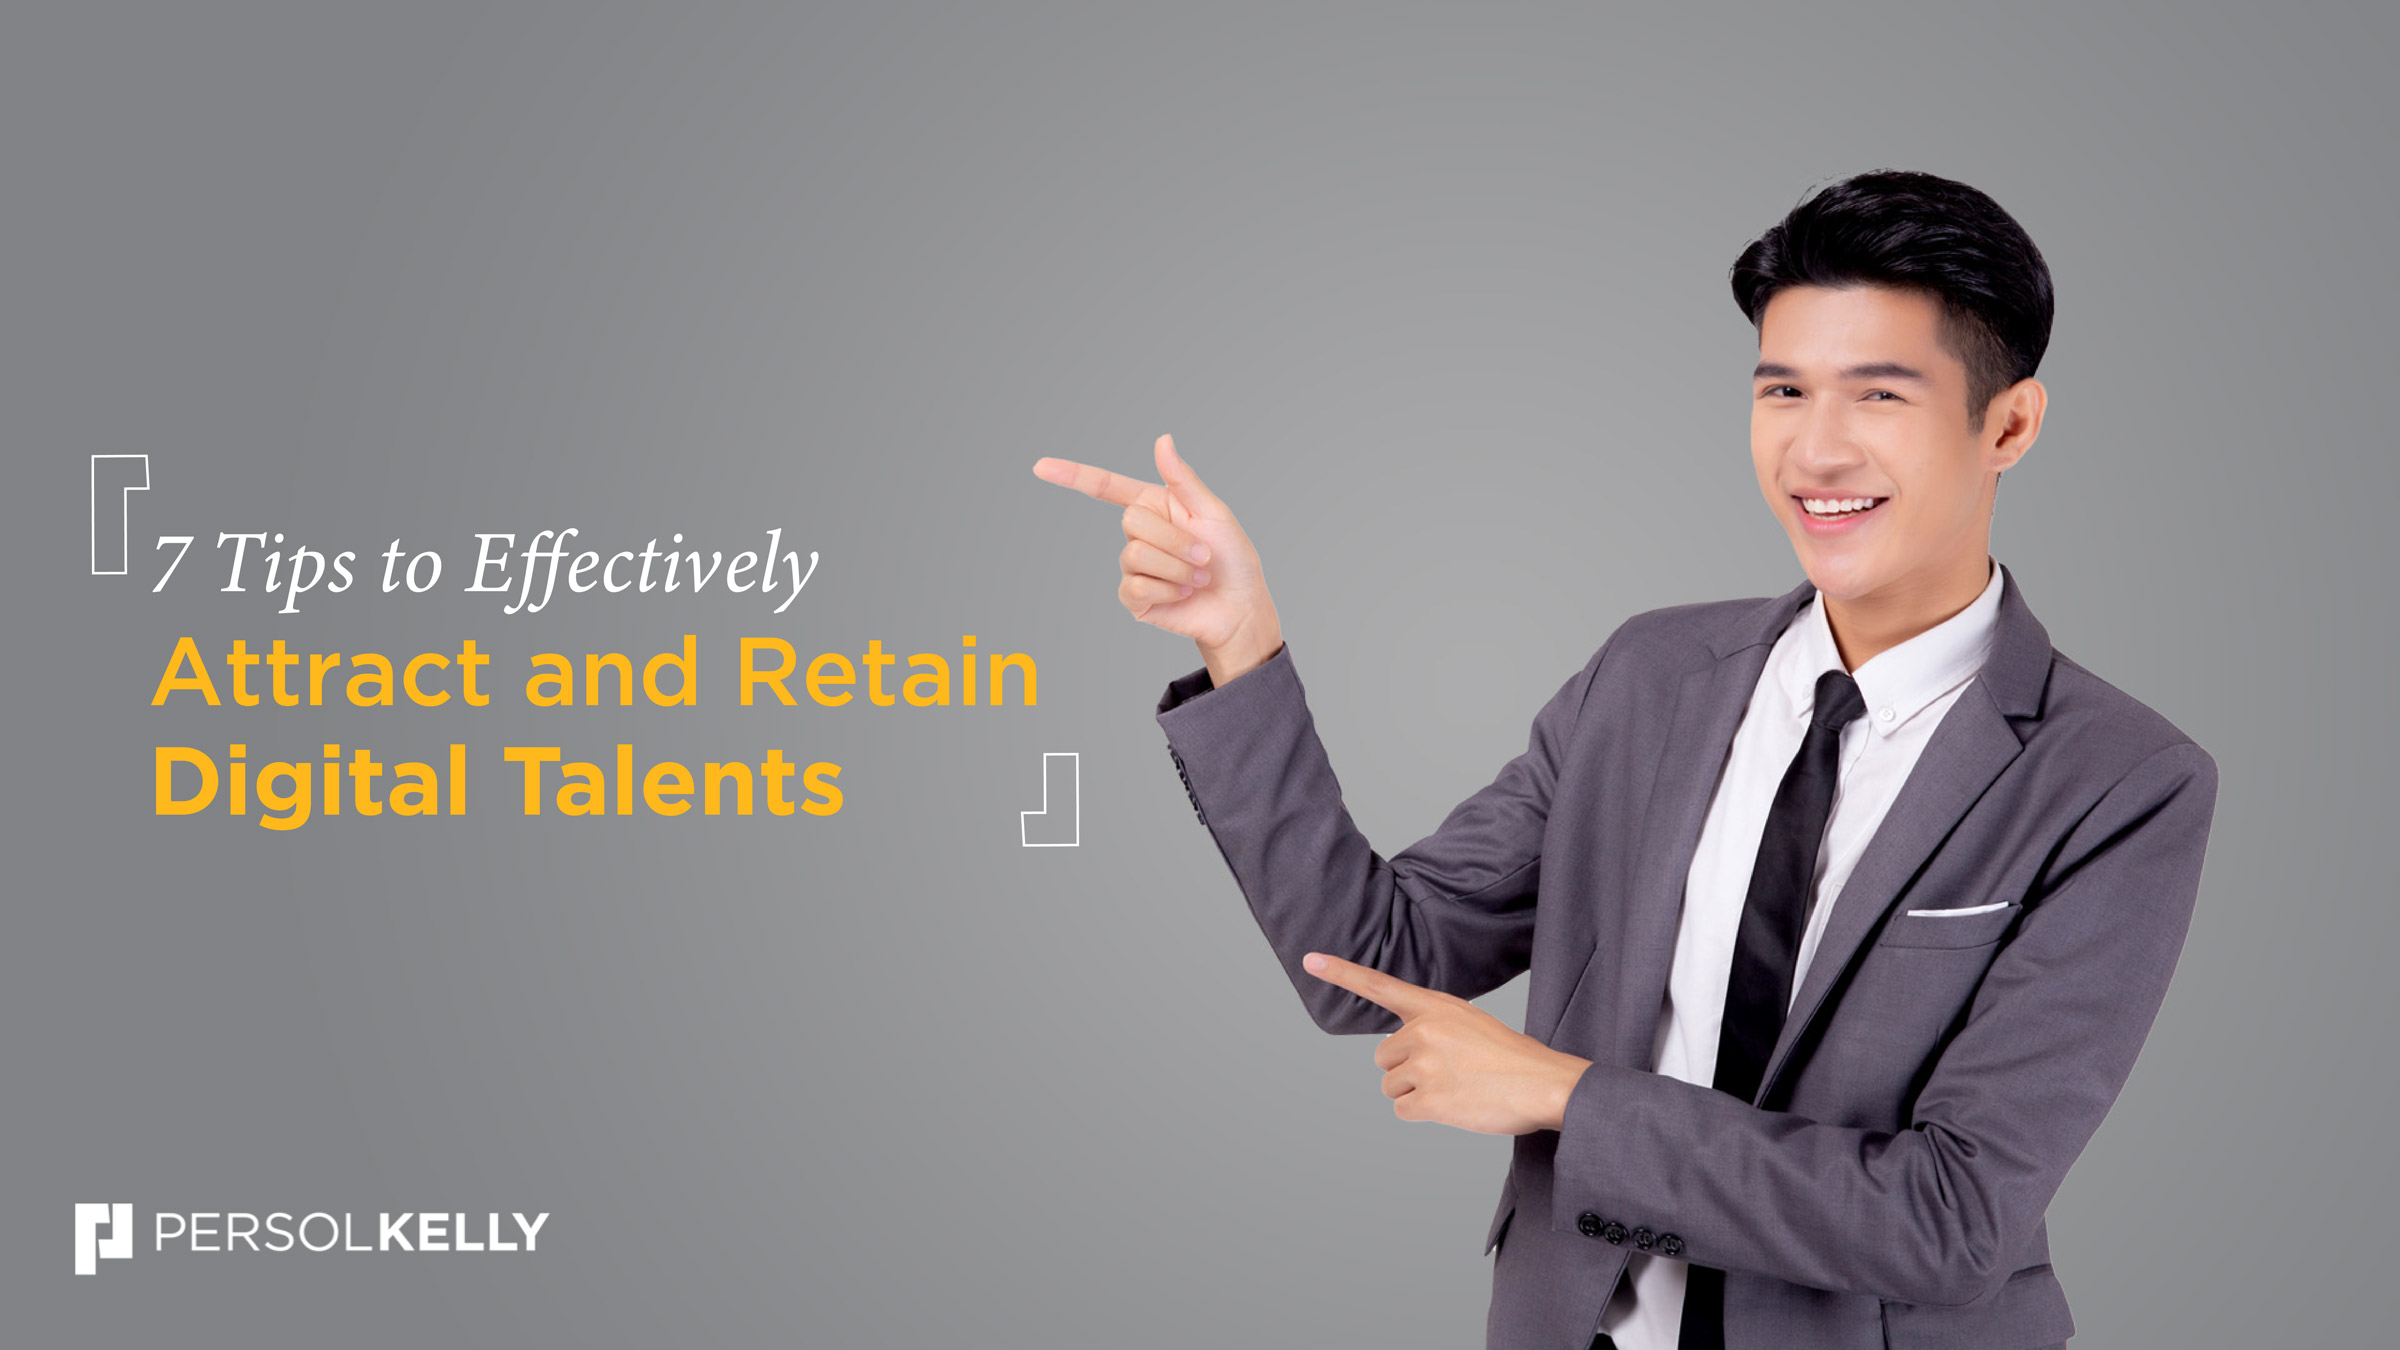 7 Tips to Effectively Attract and Retain Digital Talent